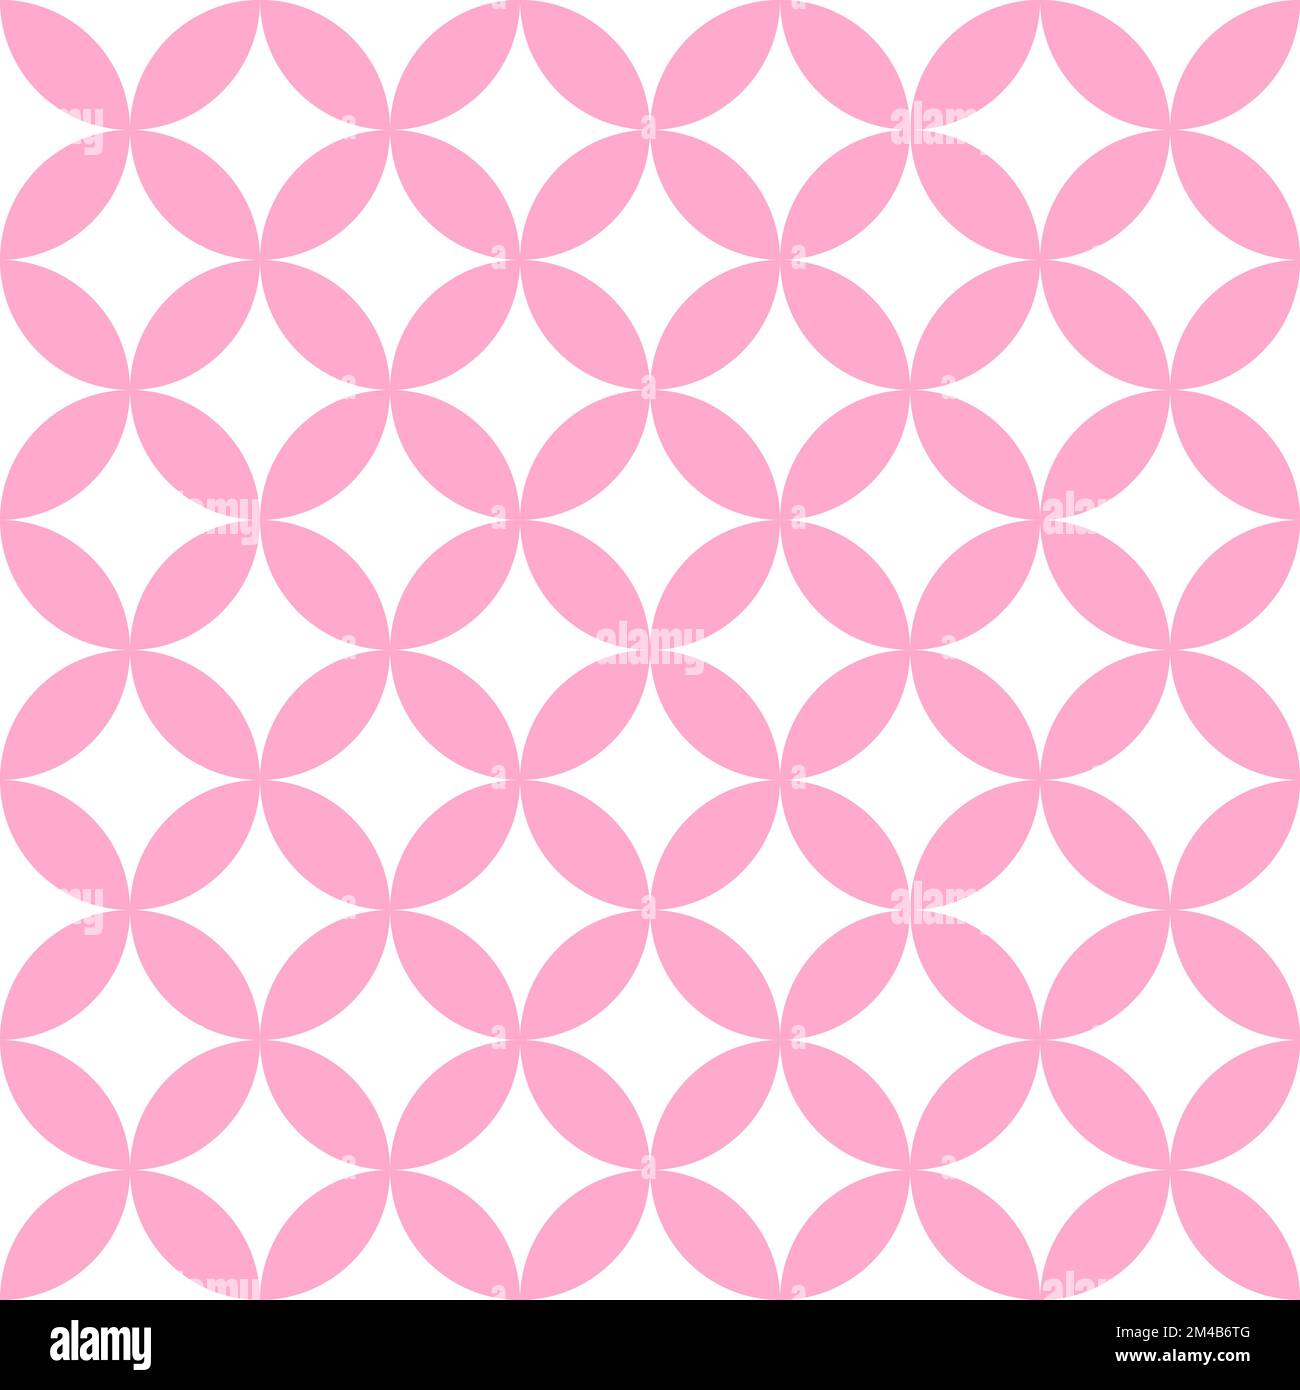 Pink On White Overlapping Circles Seamless Texture Classic Ovals And